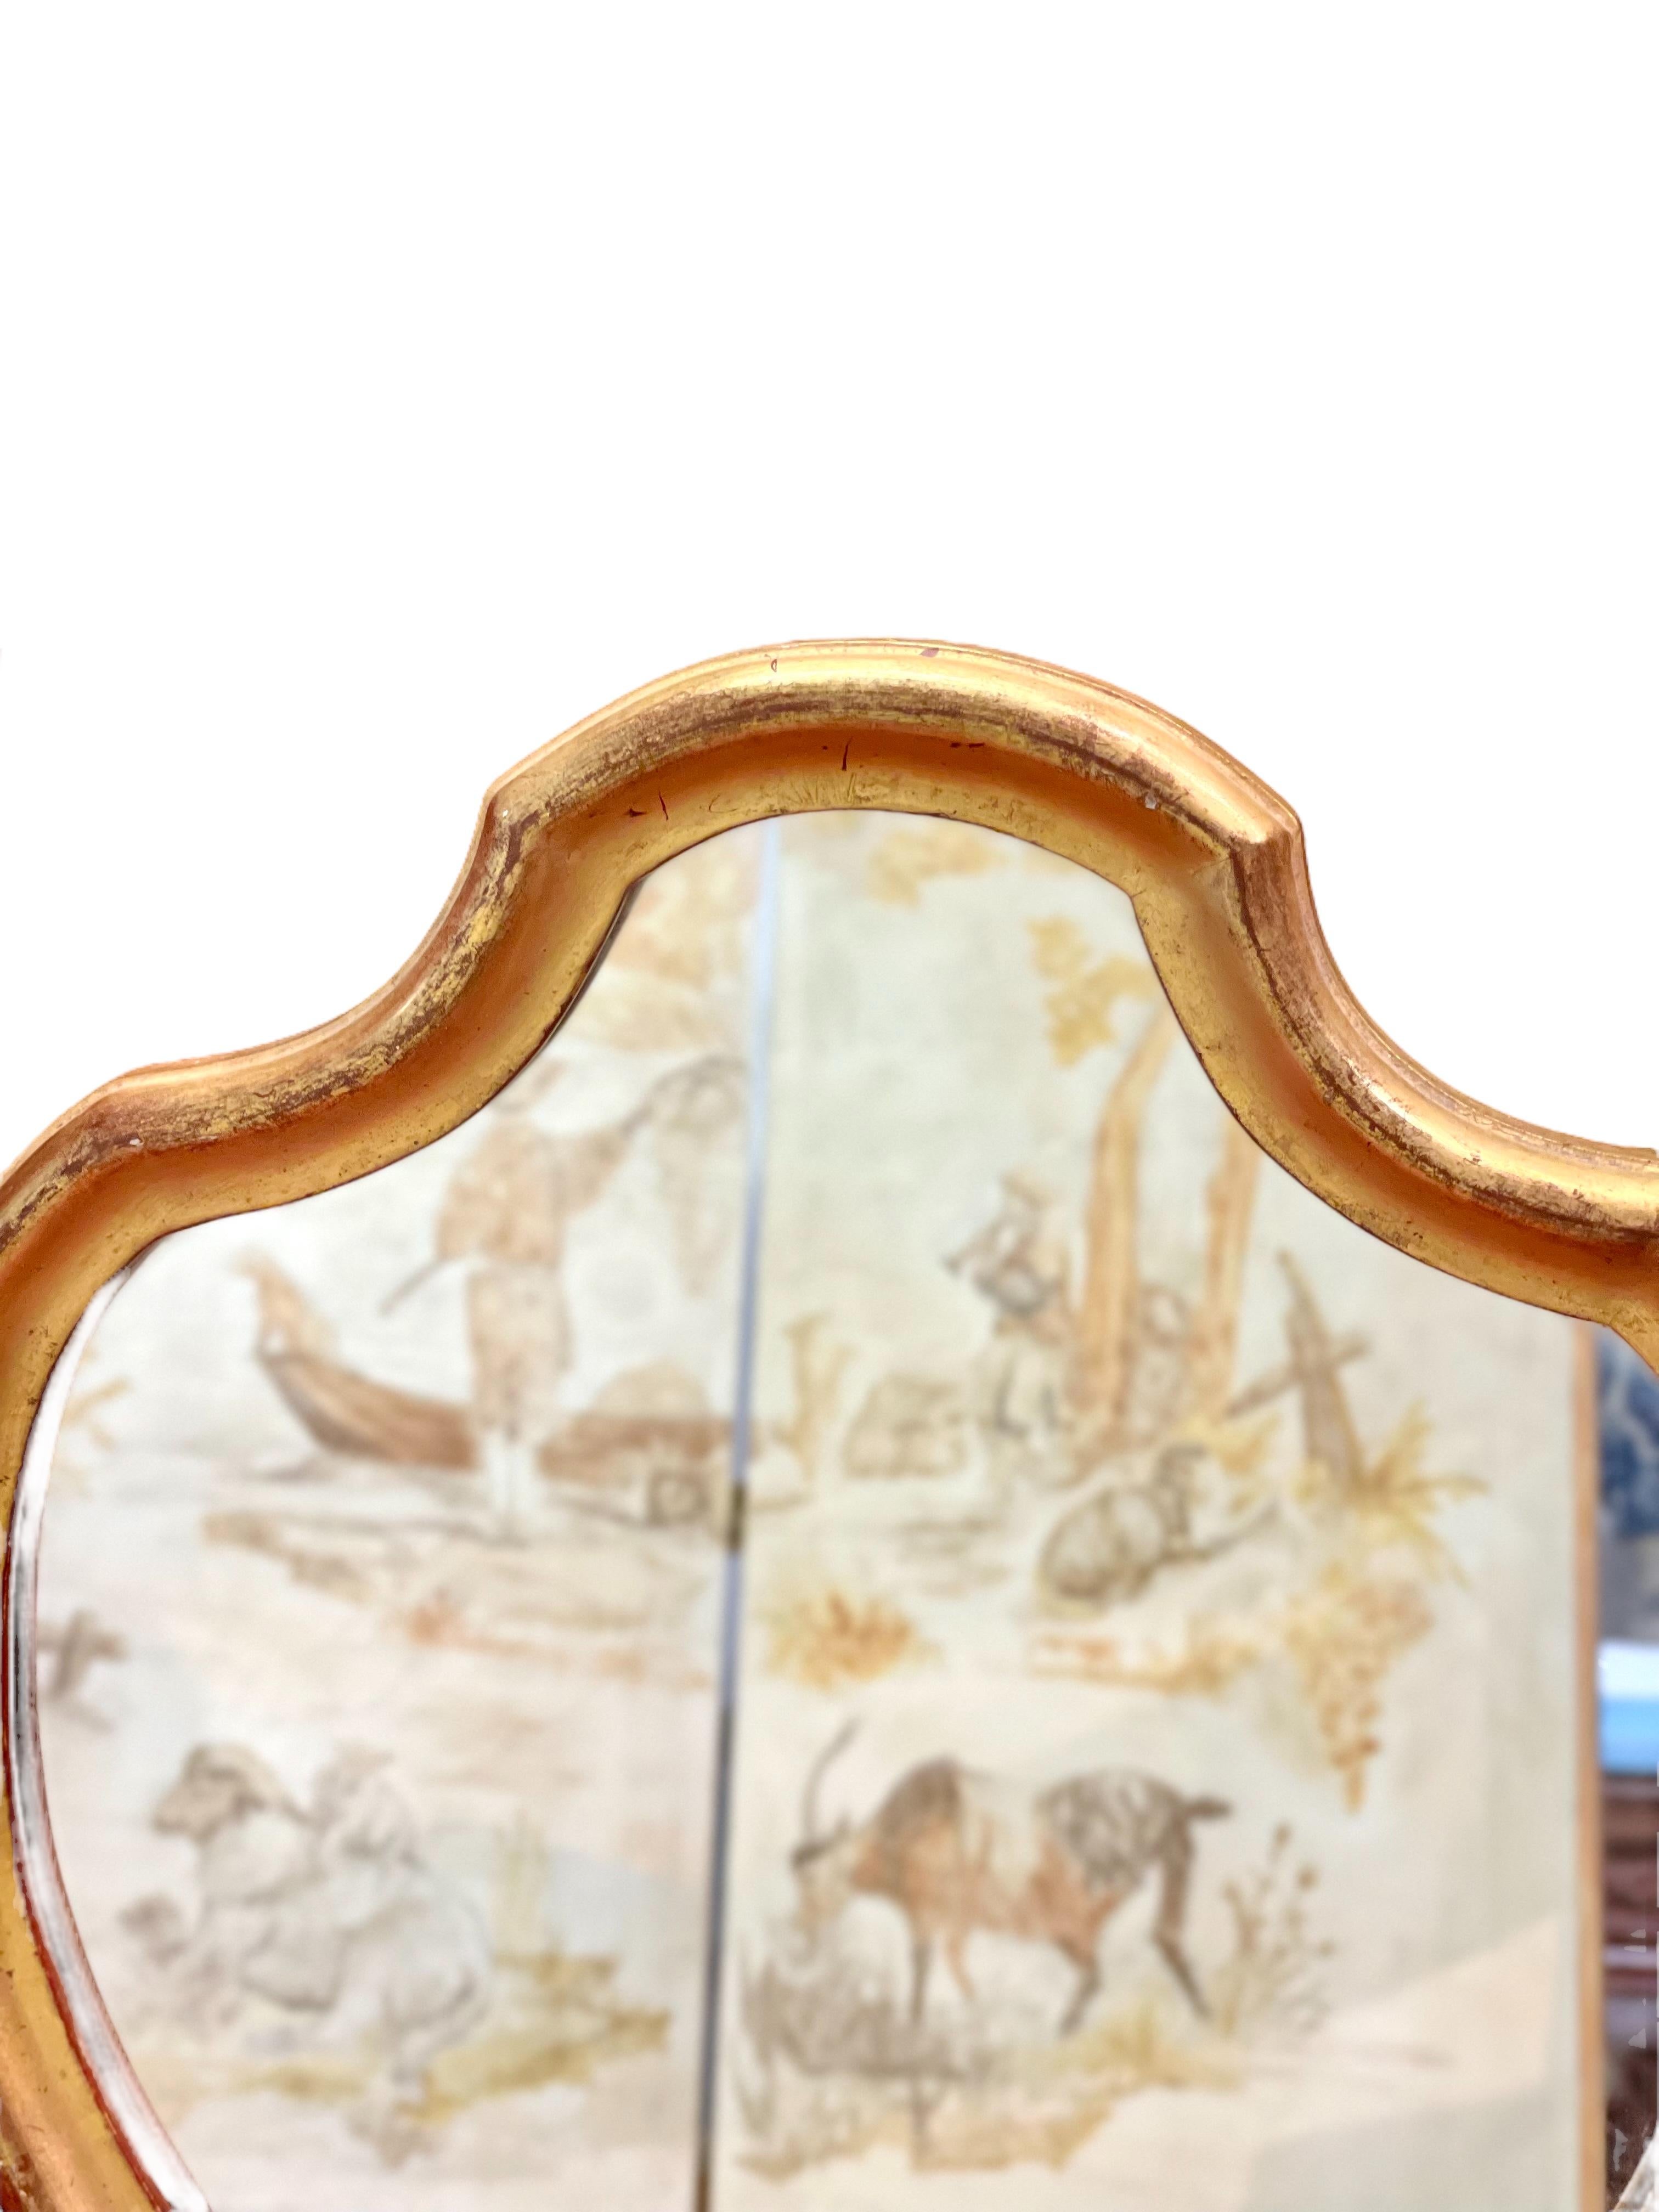 A very decorative violin-shaped giltwood mirror, dating from the end of the 19th century. This elegant wall mirror has a lovely worn patina, with the original red gesso color. It would be ideal in a hallway, or smaller room, its gleaming golden